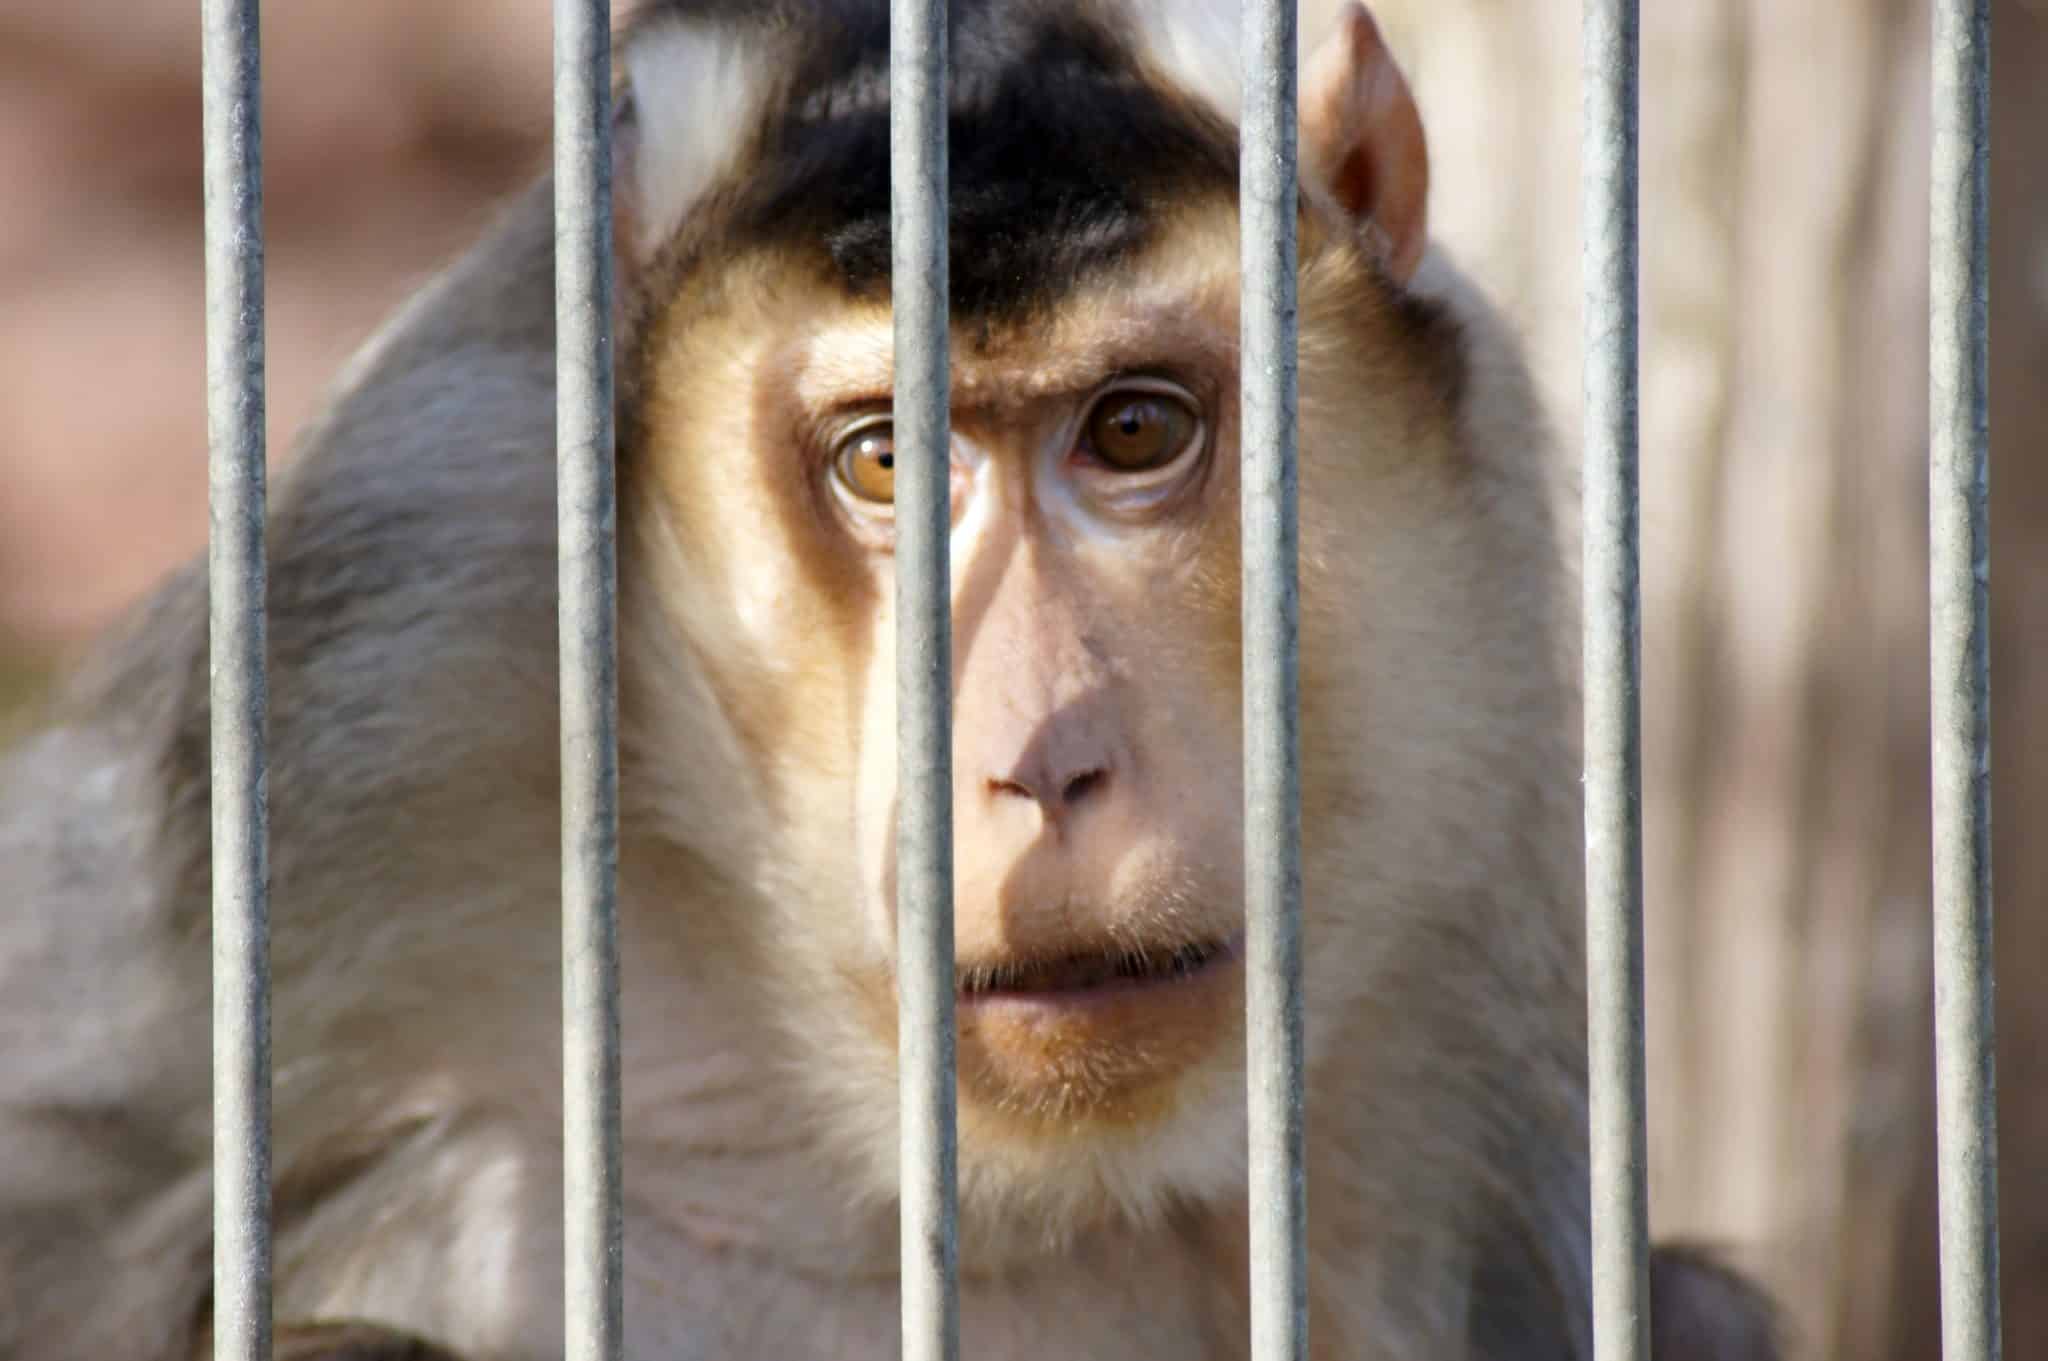 Petition: Monkey Strangled to Death in California Lab